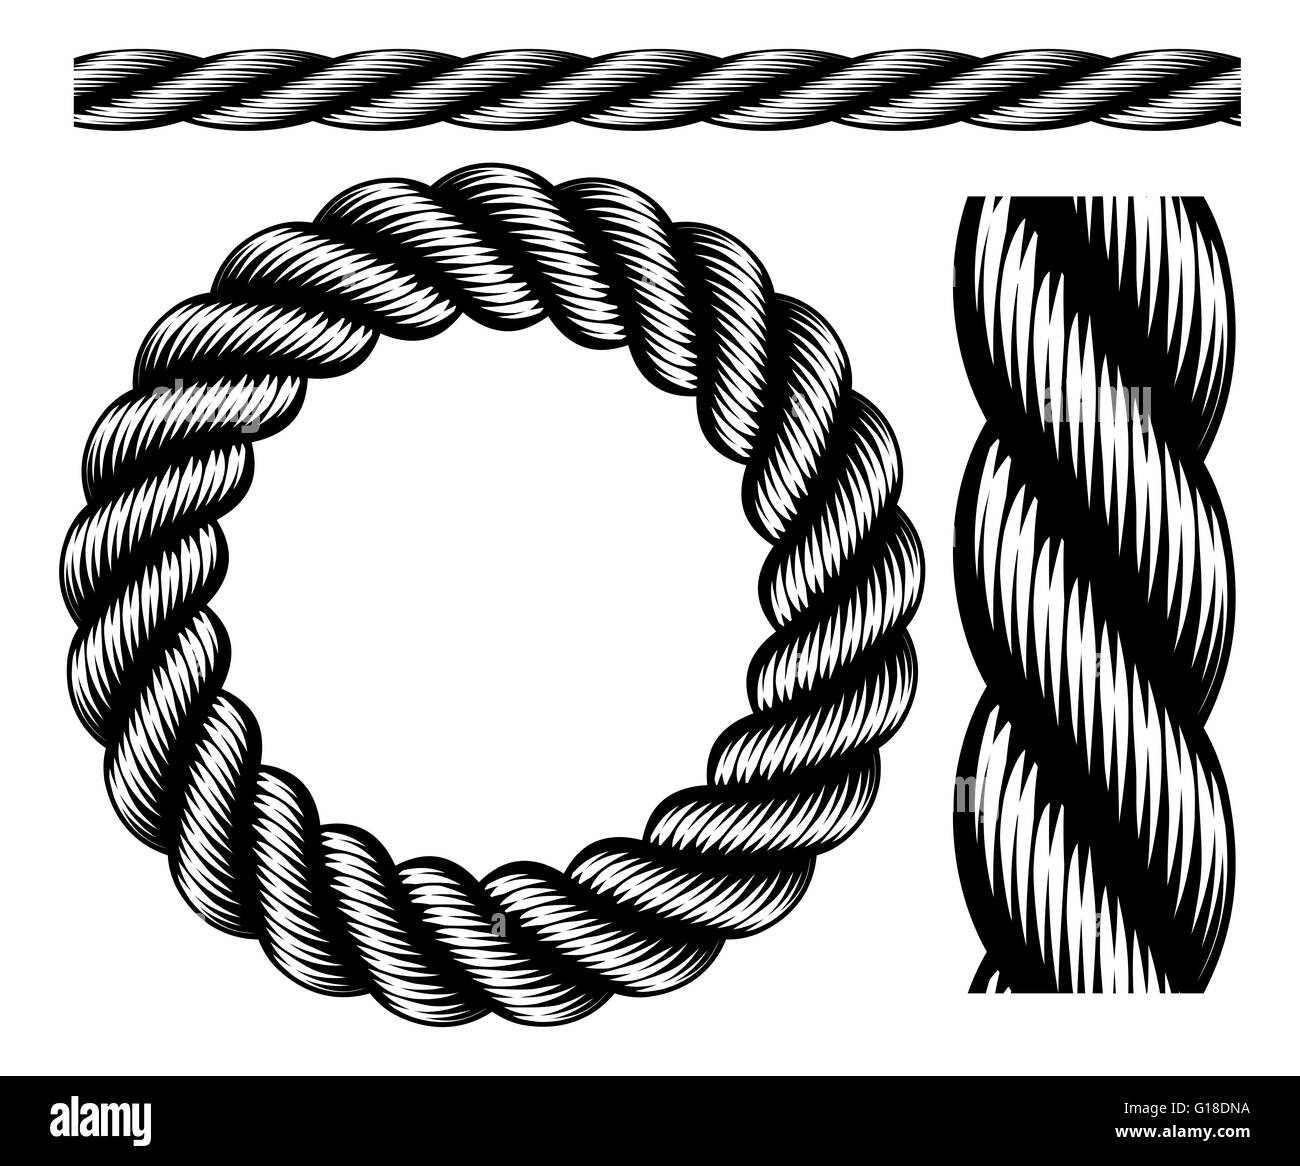 A set of nautical rope design elements Stock Photo